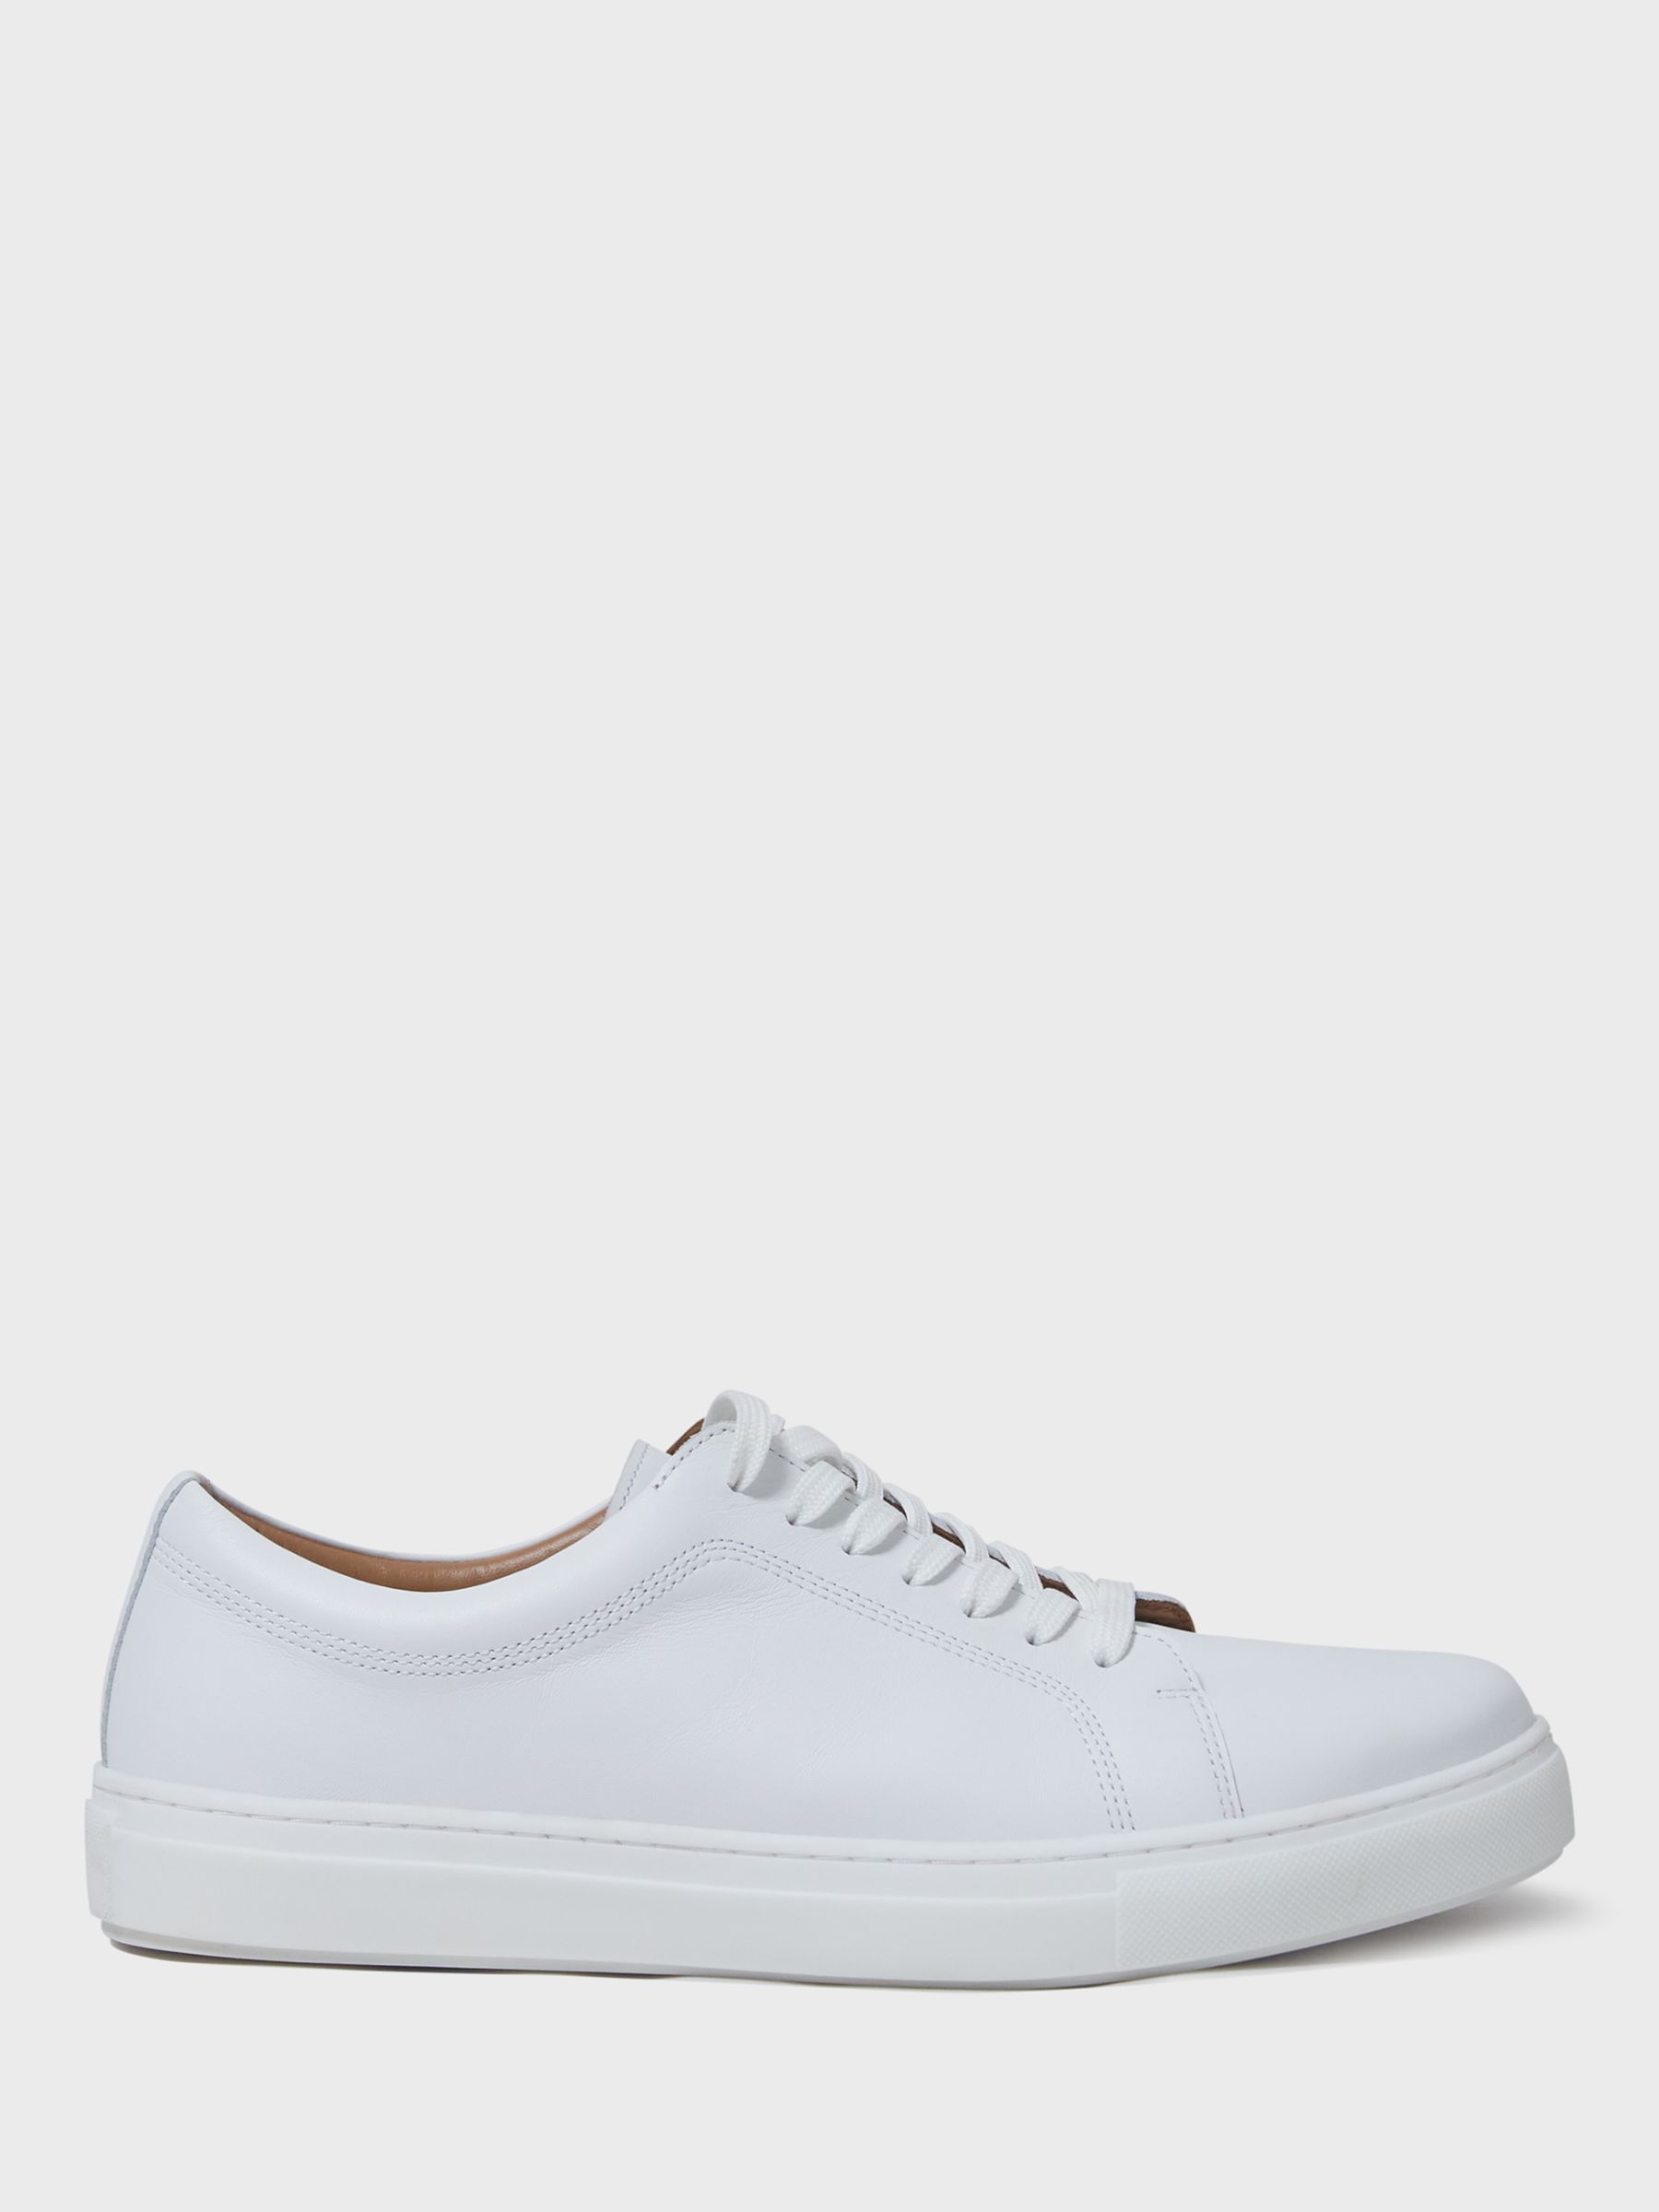 Crew Clothing Lucas Leather Lace Up Trainers, White, 7